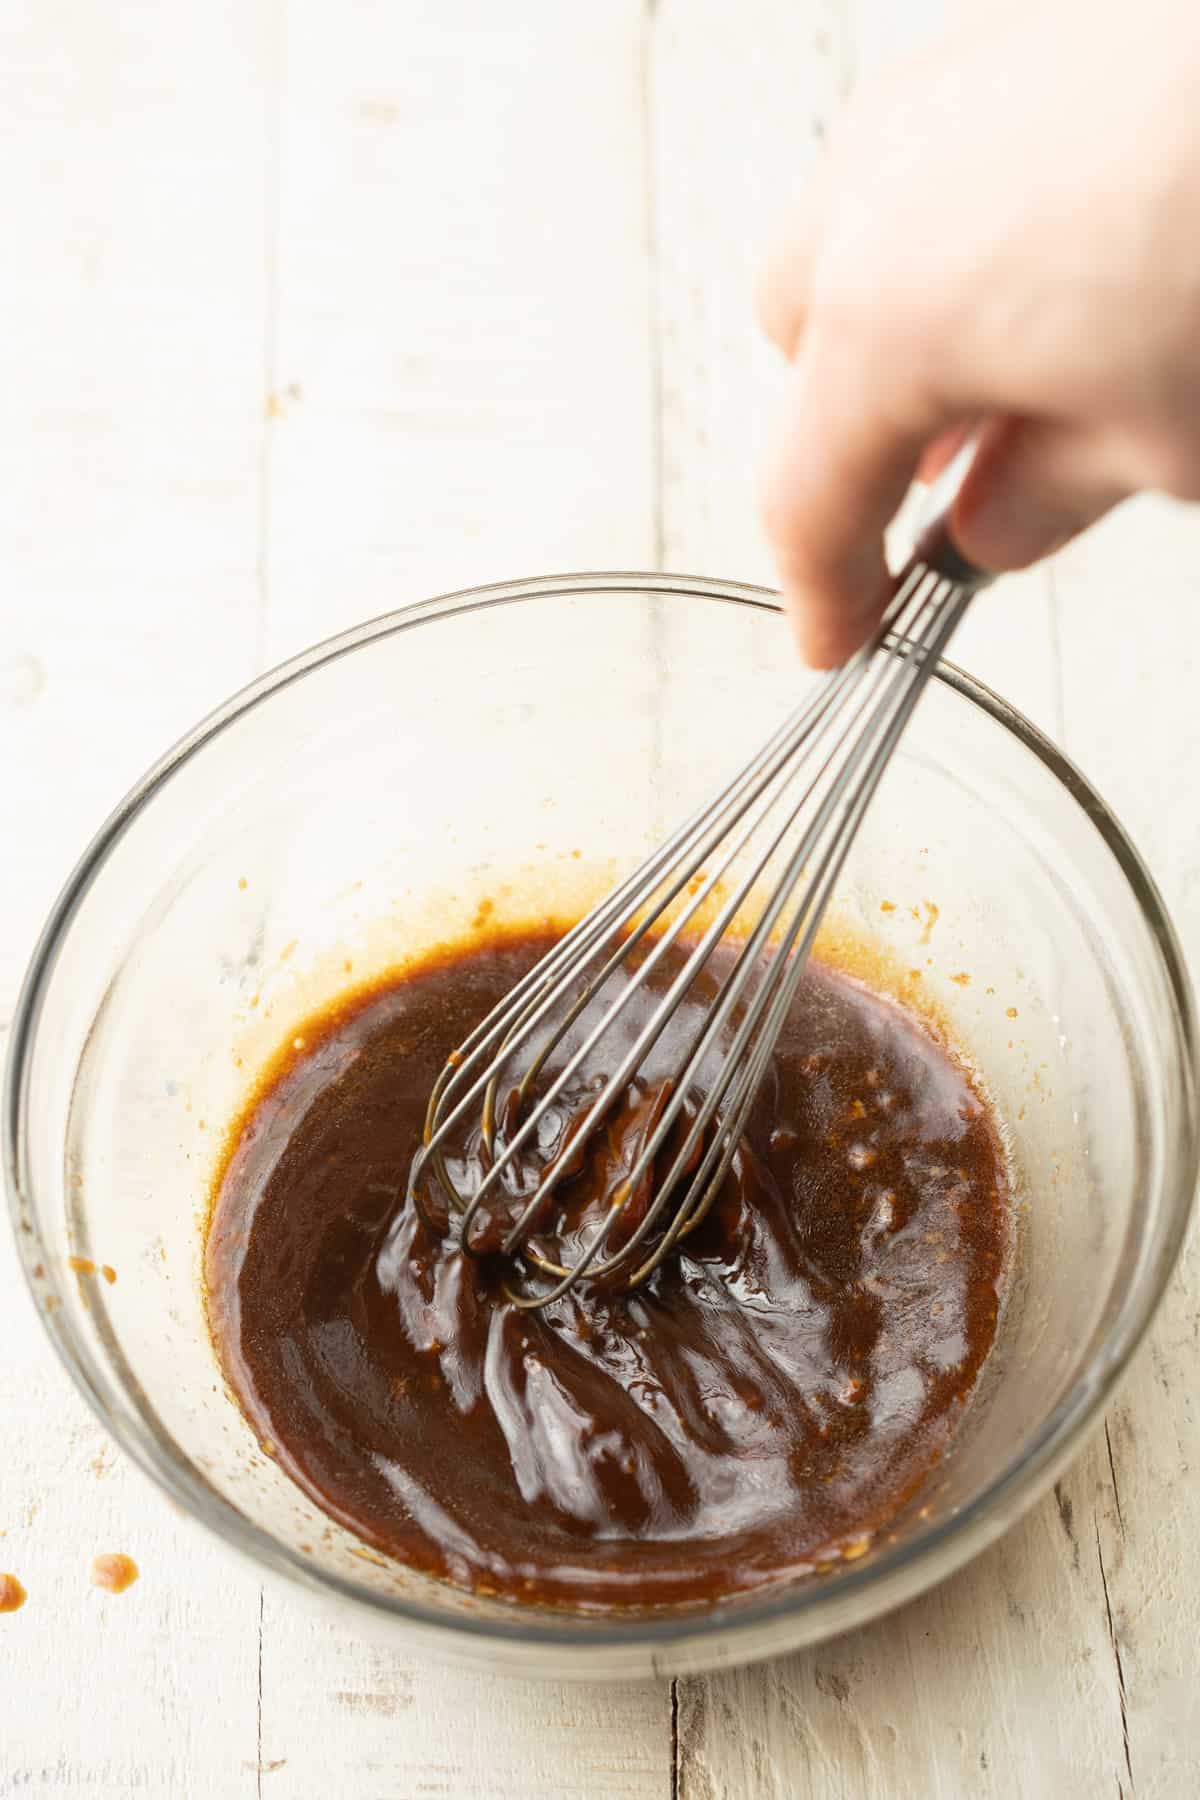 Hand whisking stir-fry sauce in a glass bowl.